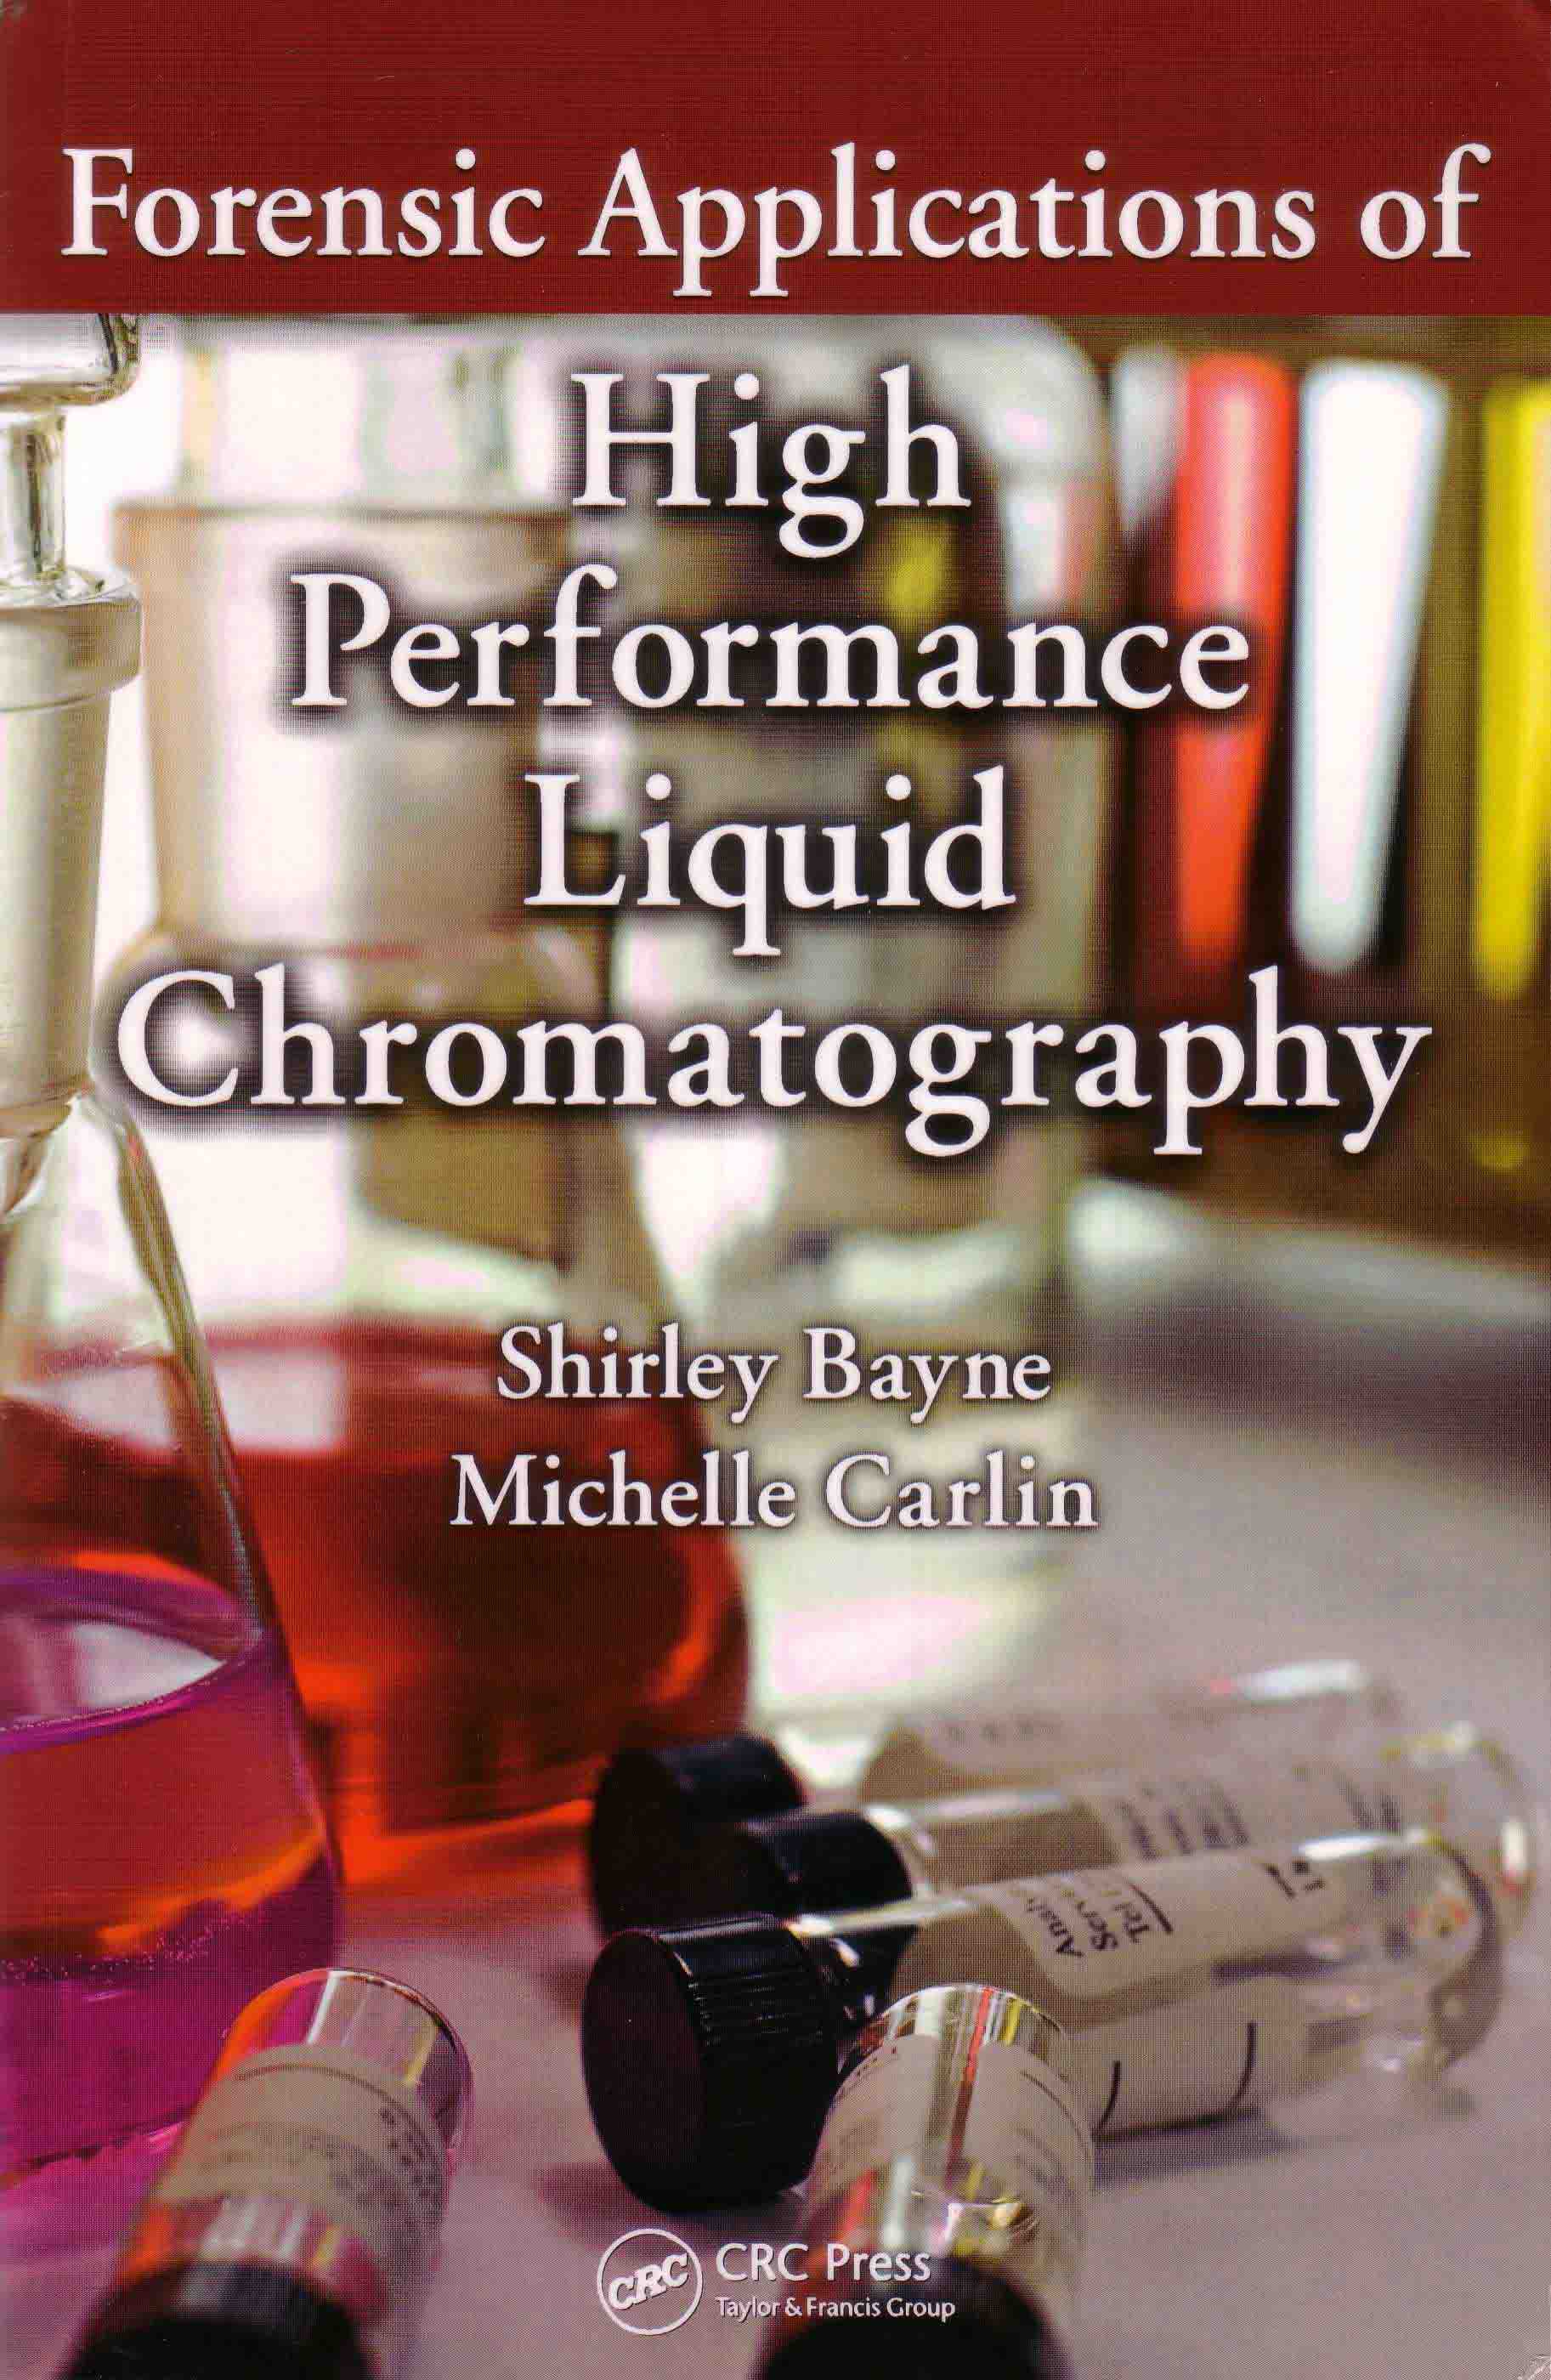 Forensic Applications of High Performance Liquid Chromatography, by Shirley Bayne and Michelle Carlin